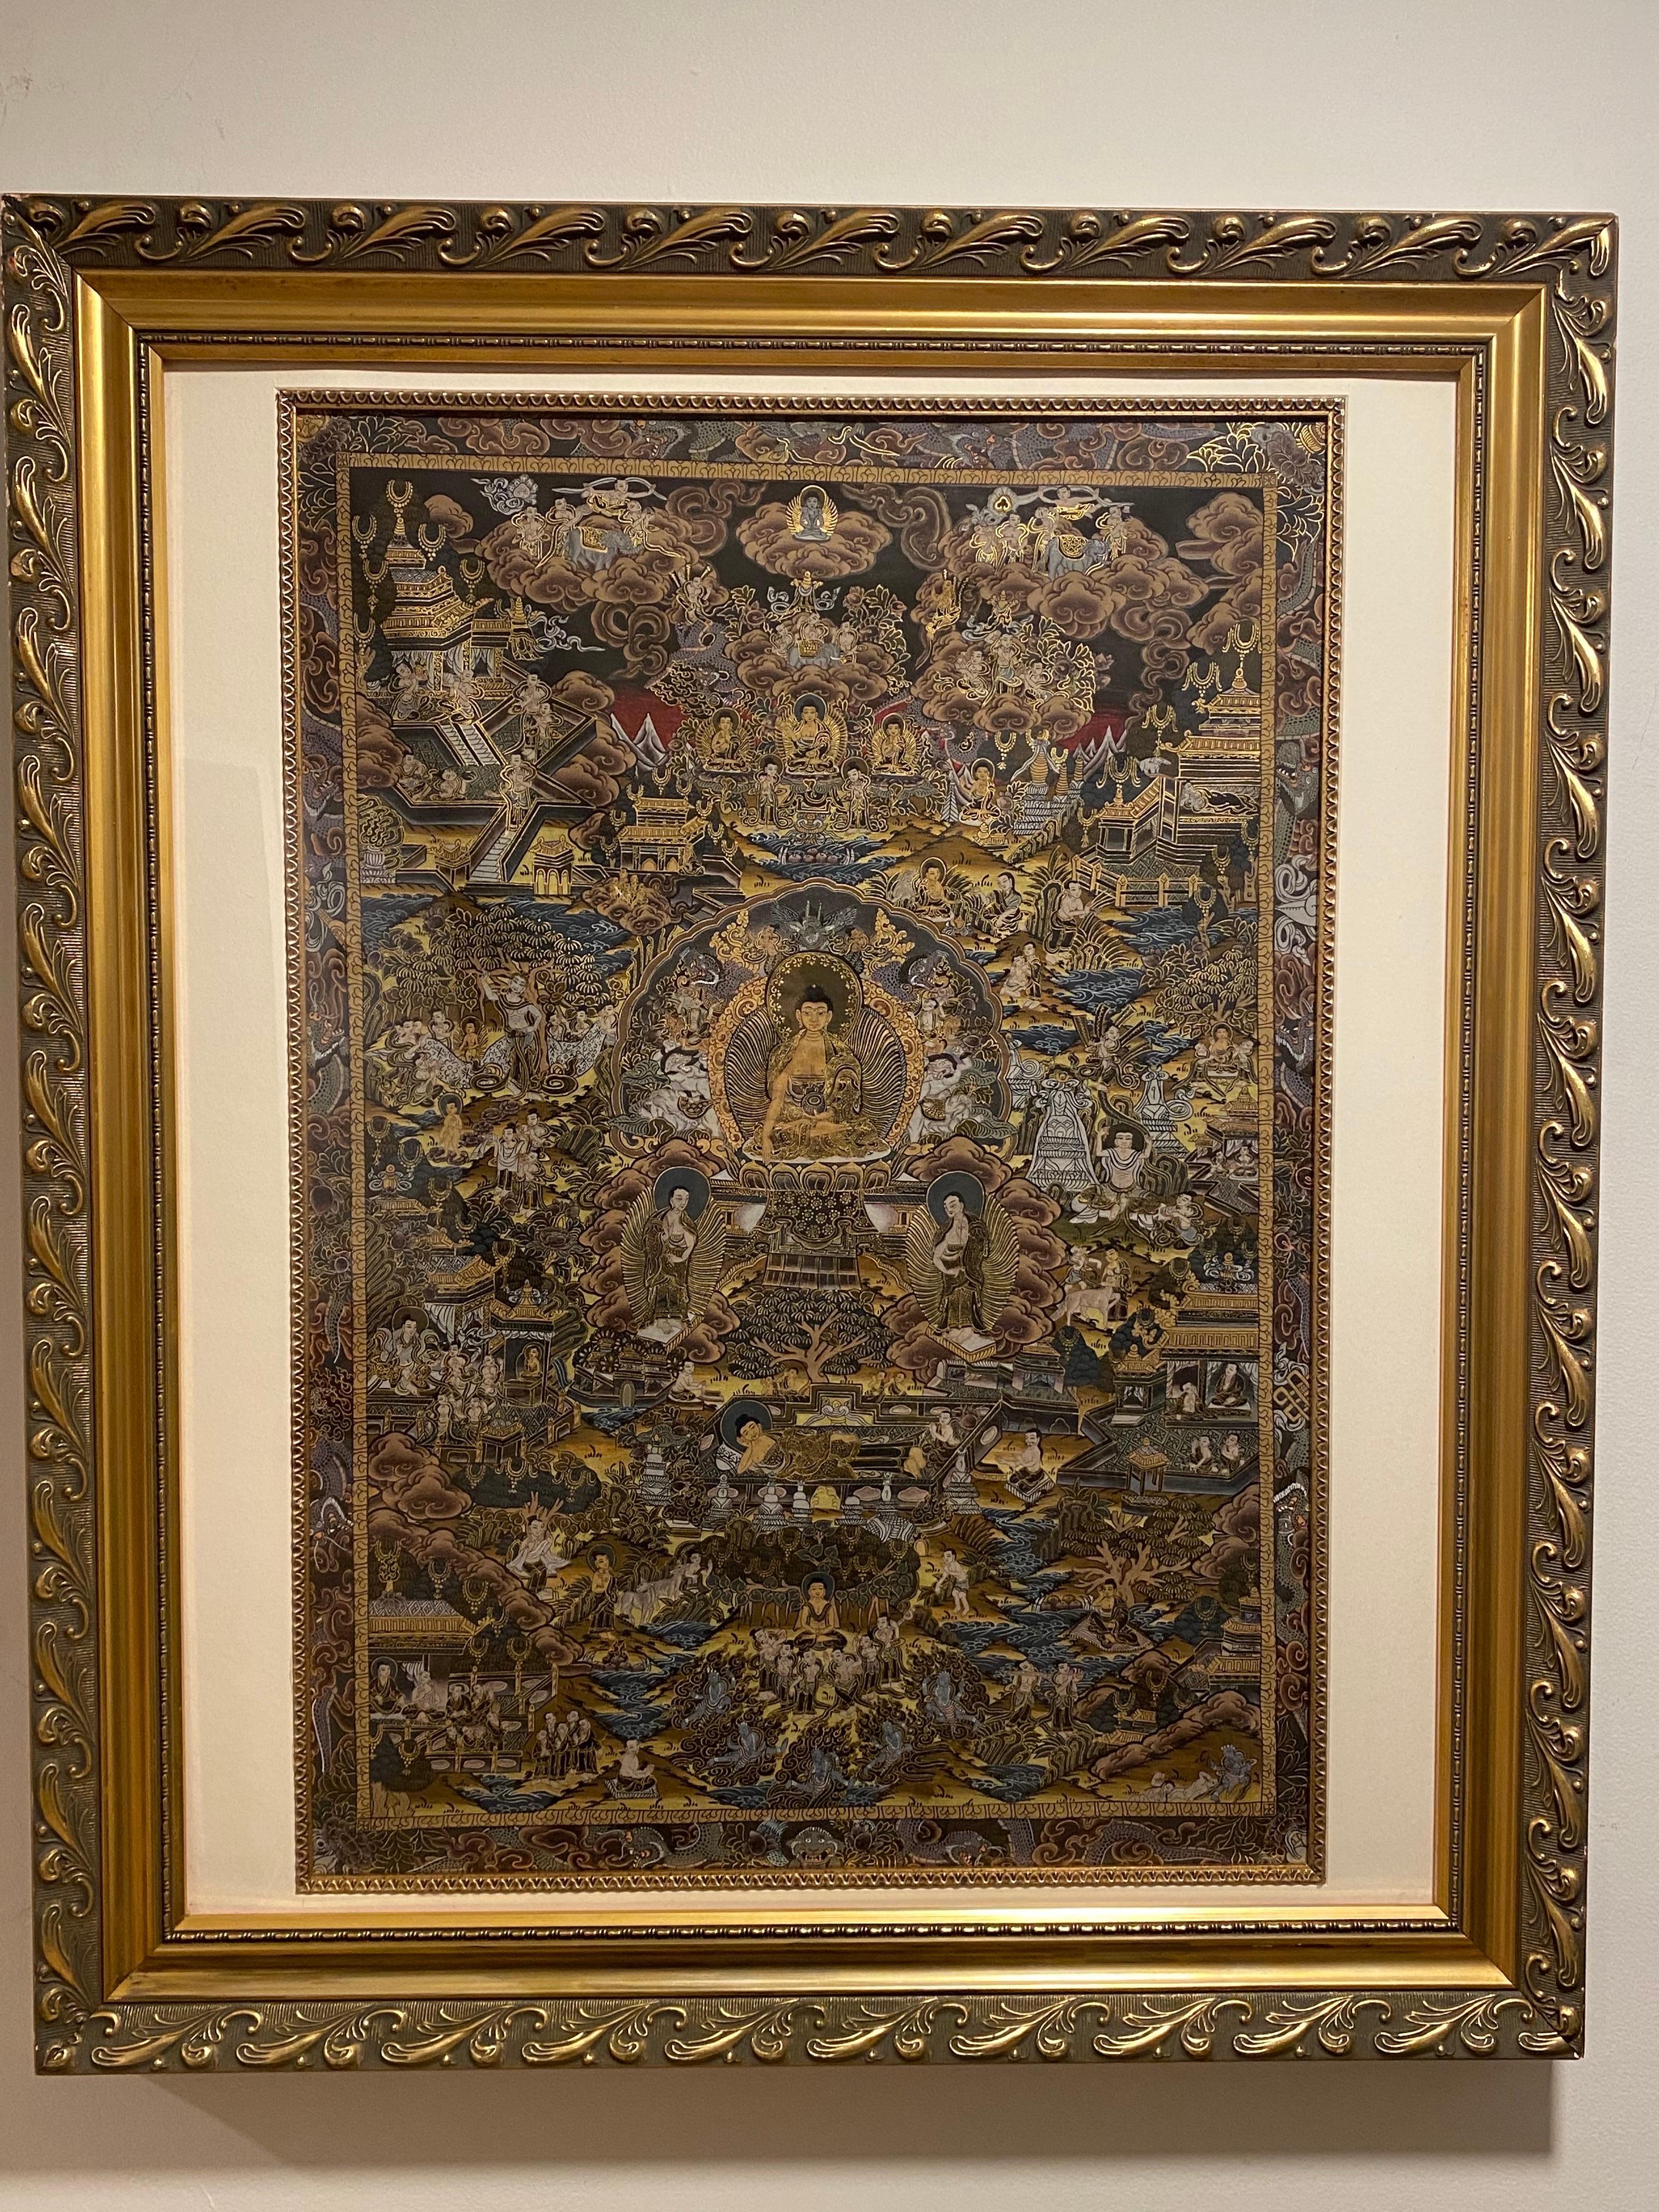 Framed Hand Painted Life History of Buddha Thangka on Canvas 24k Gold - Painting by Unknown